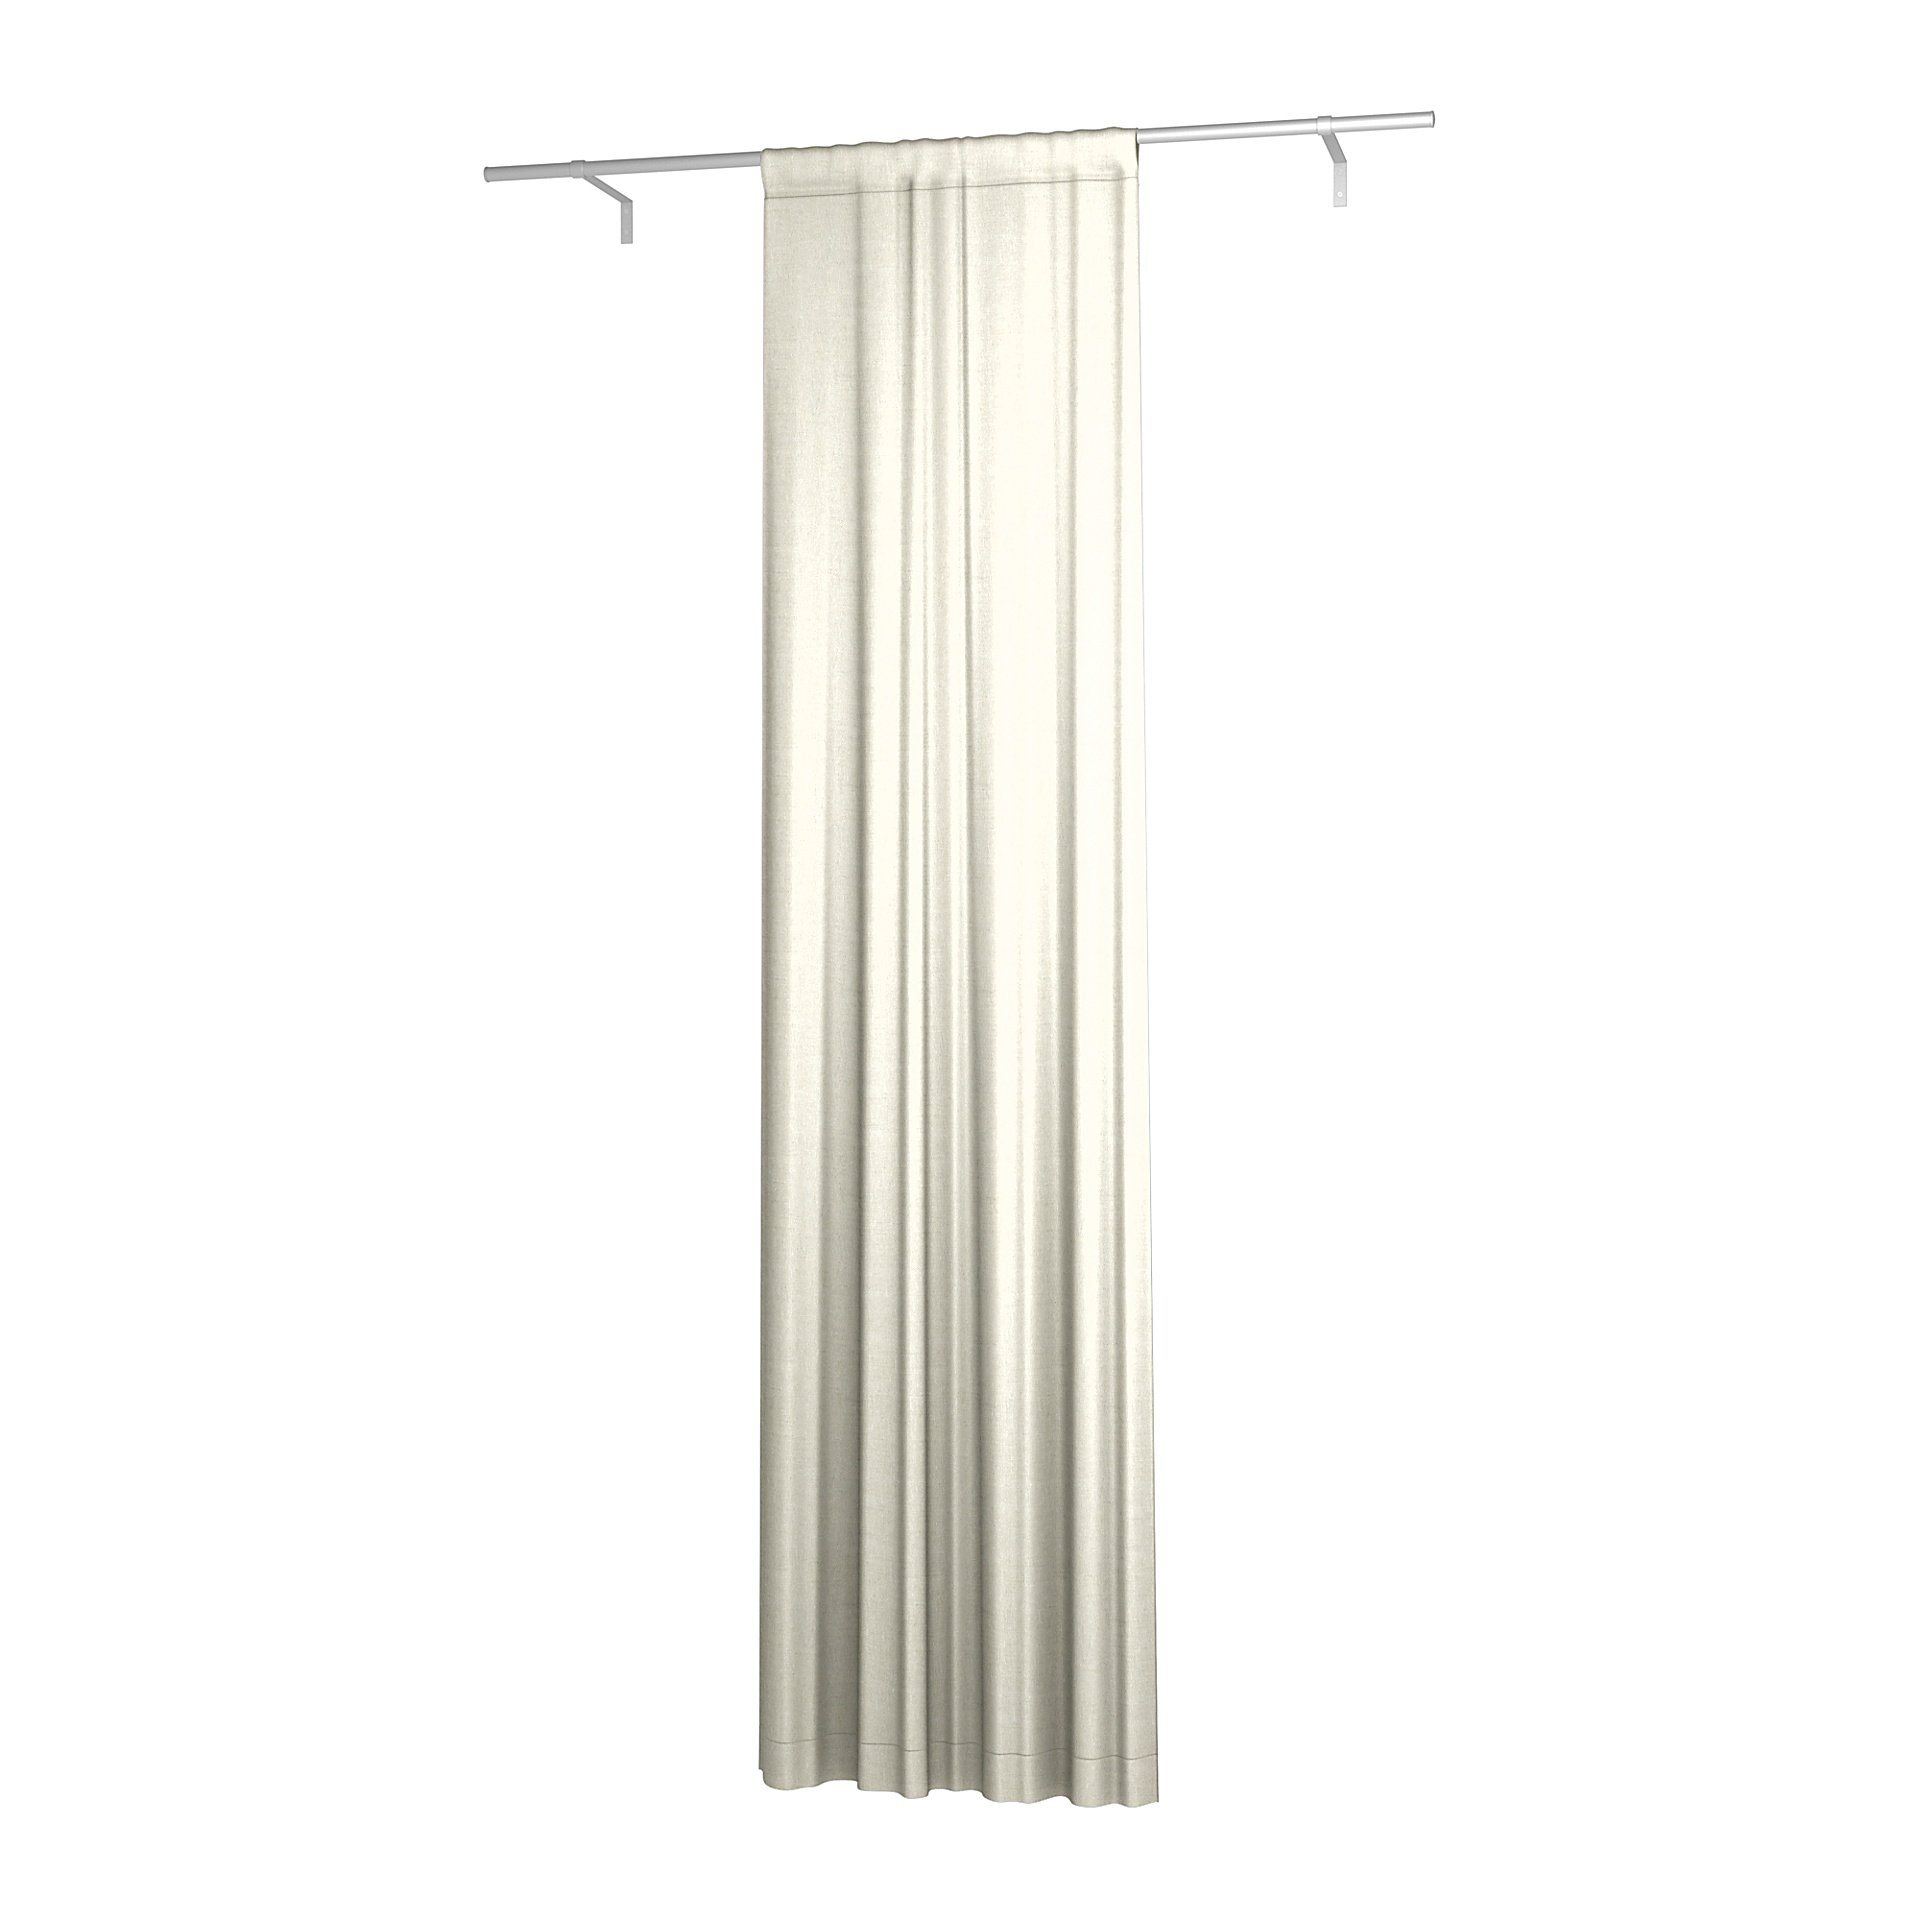 Single Width Curtain Panel with Tunnel/Creaseband, 250 cm, Natural, Linen - Bemz